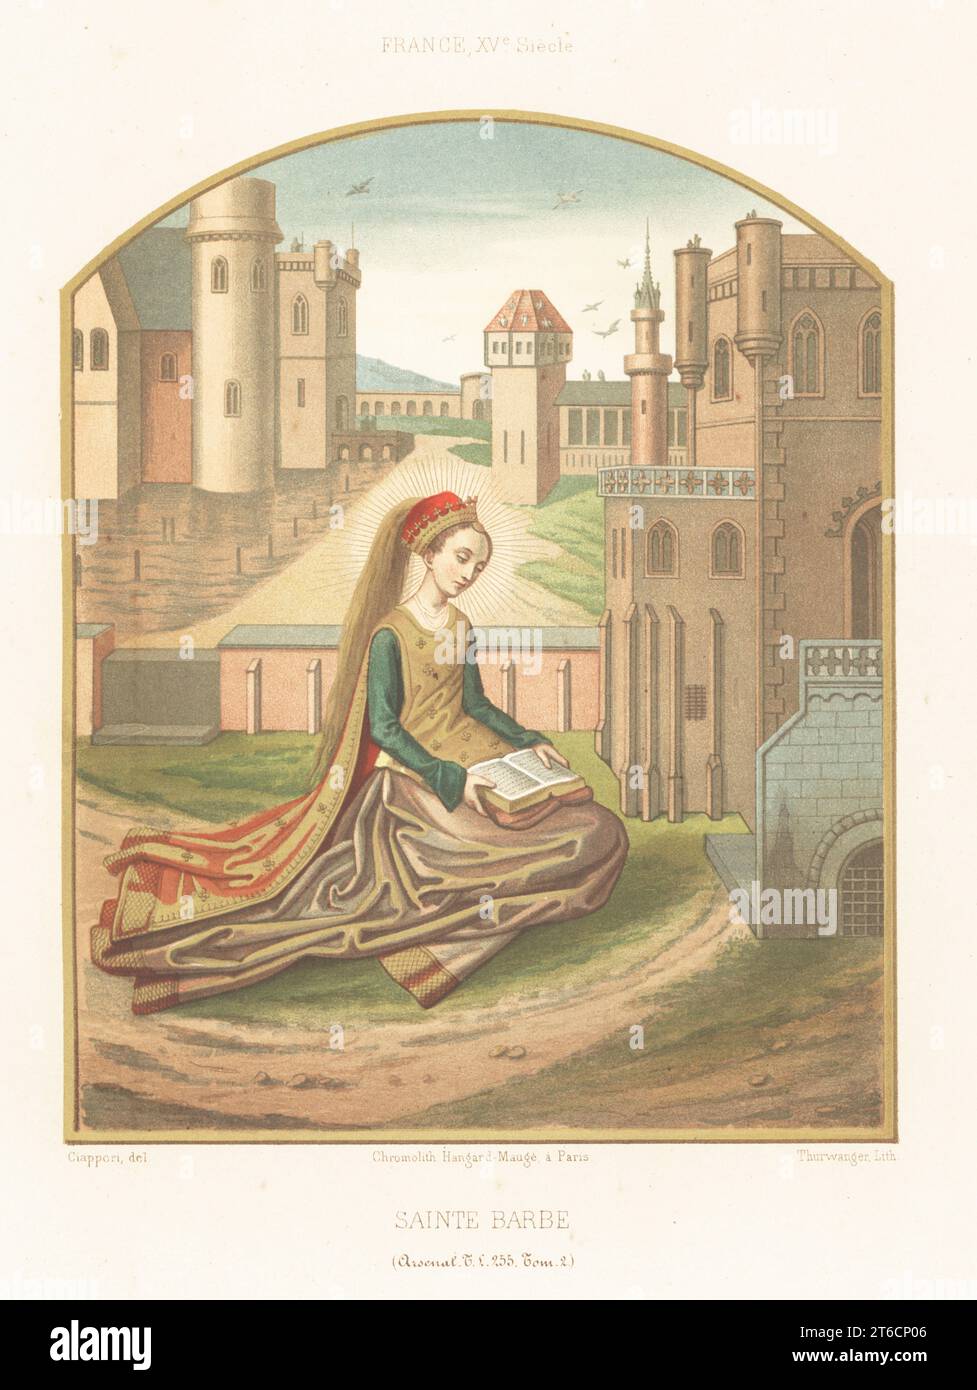 Saint Barbara, virgin martyr, patron saint of explosives, 3rd century. In crown and velvet gown, reading a Bible near a town with a round tower with three windows. In 15th century French costume. Saint Barbe, XVe siecle. Taken from a Book of Hours, livre d'heures, MS Tl 255, Tom. 2, Bibliotheque de l'Arsenal. Chromolithograph by Thurwanger after an illustration by Claudius Joseph Ciappori from Charles Louandres Les Arts Somptuaires, The Sumptuary Arts, Hangard-Mauge, Paris, 1858. Stock Photo